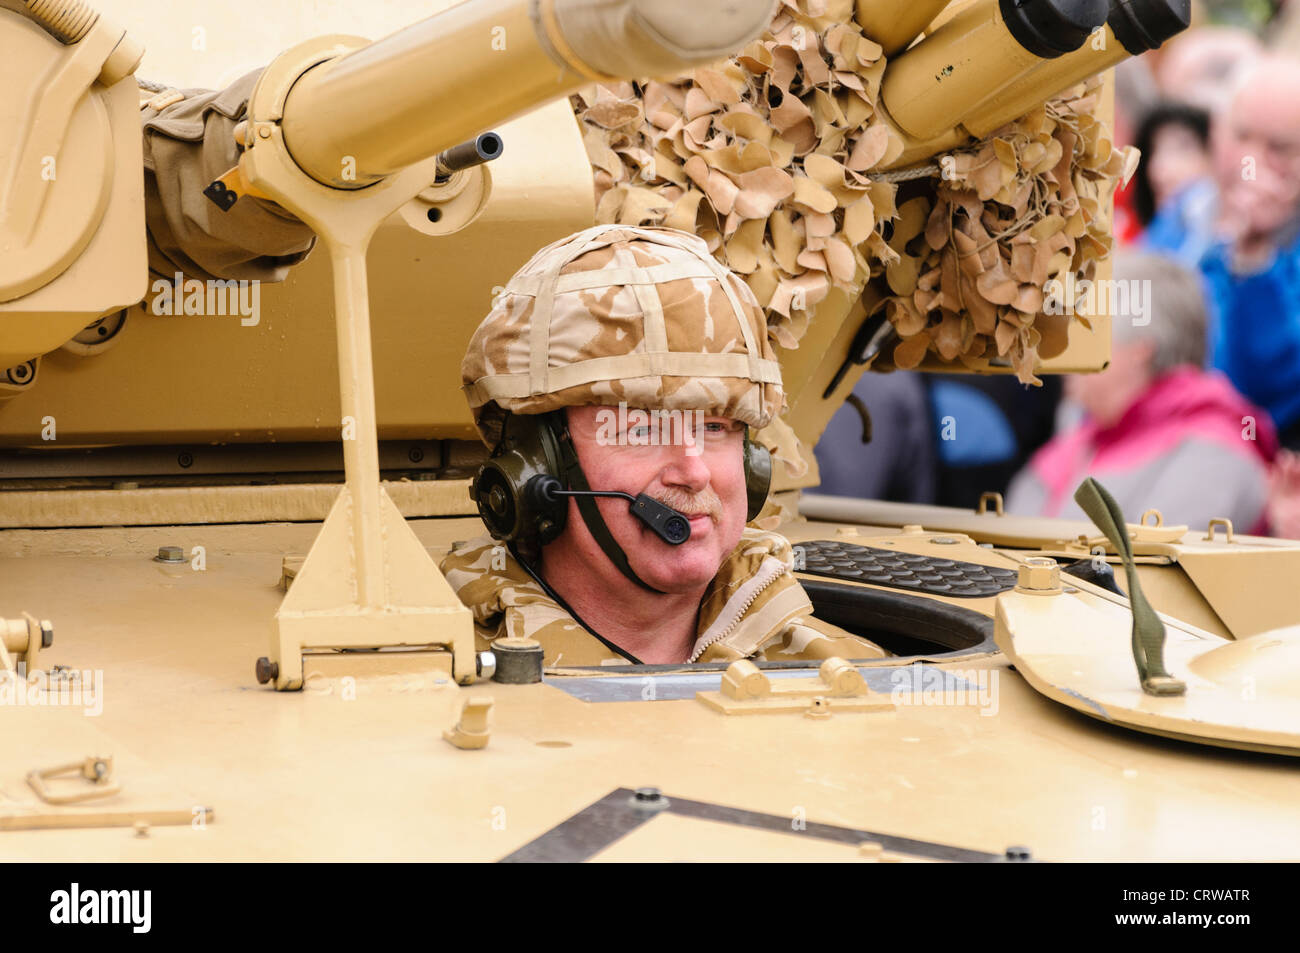 Soldier in desert fatigues drives a Scorpion reconnaisance vehicle Stock Photo